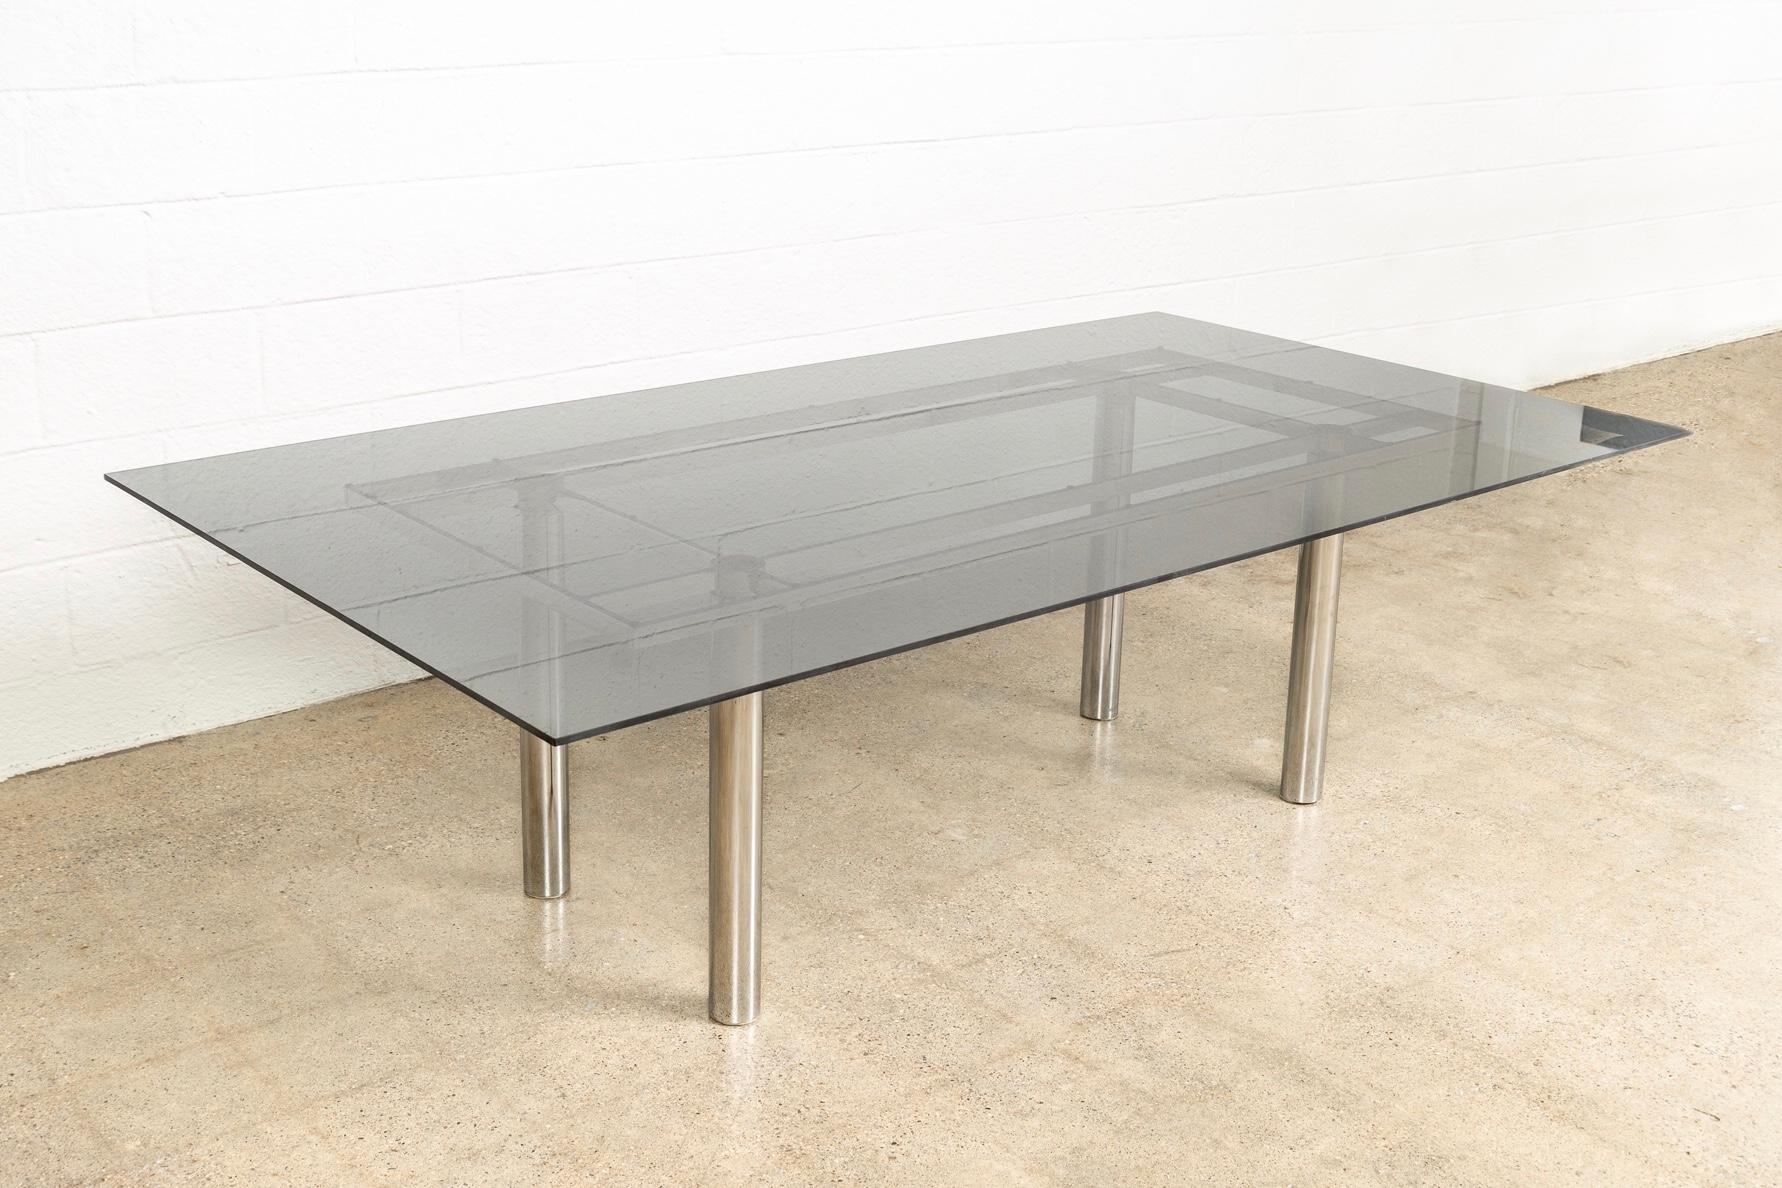 This large modernist “Andre” rectangular glass and chrome table designed by Tobia Scarpa for Knoll International is circa 1970. The table is heavy, solid and exceptionally crafted from premium materials. The sleek design has a clean Minimalist